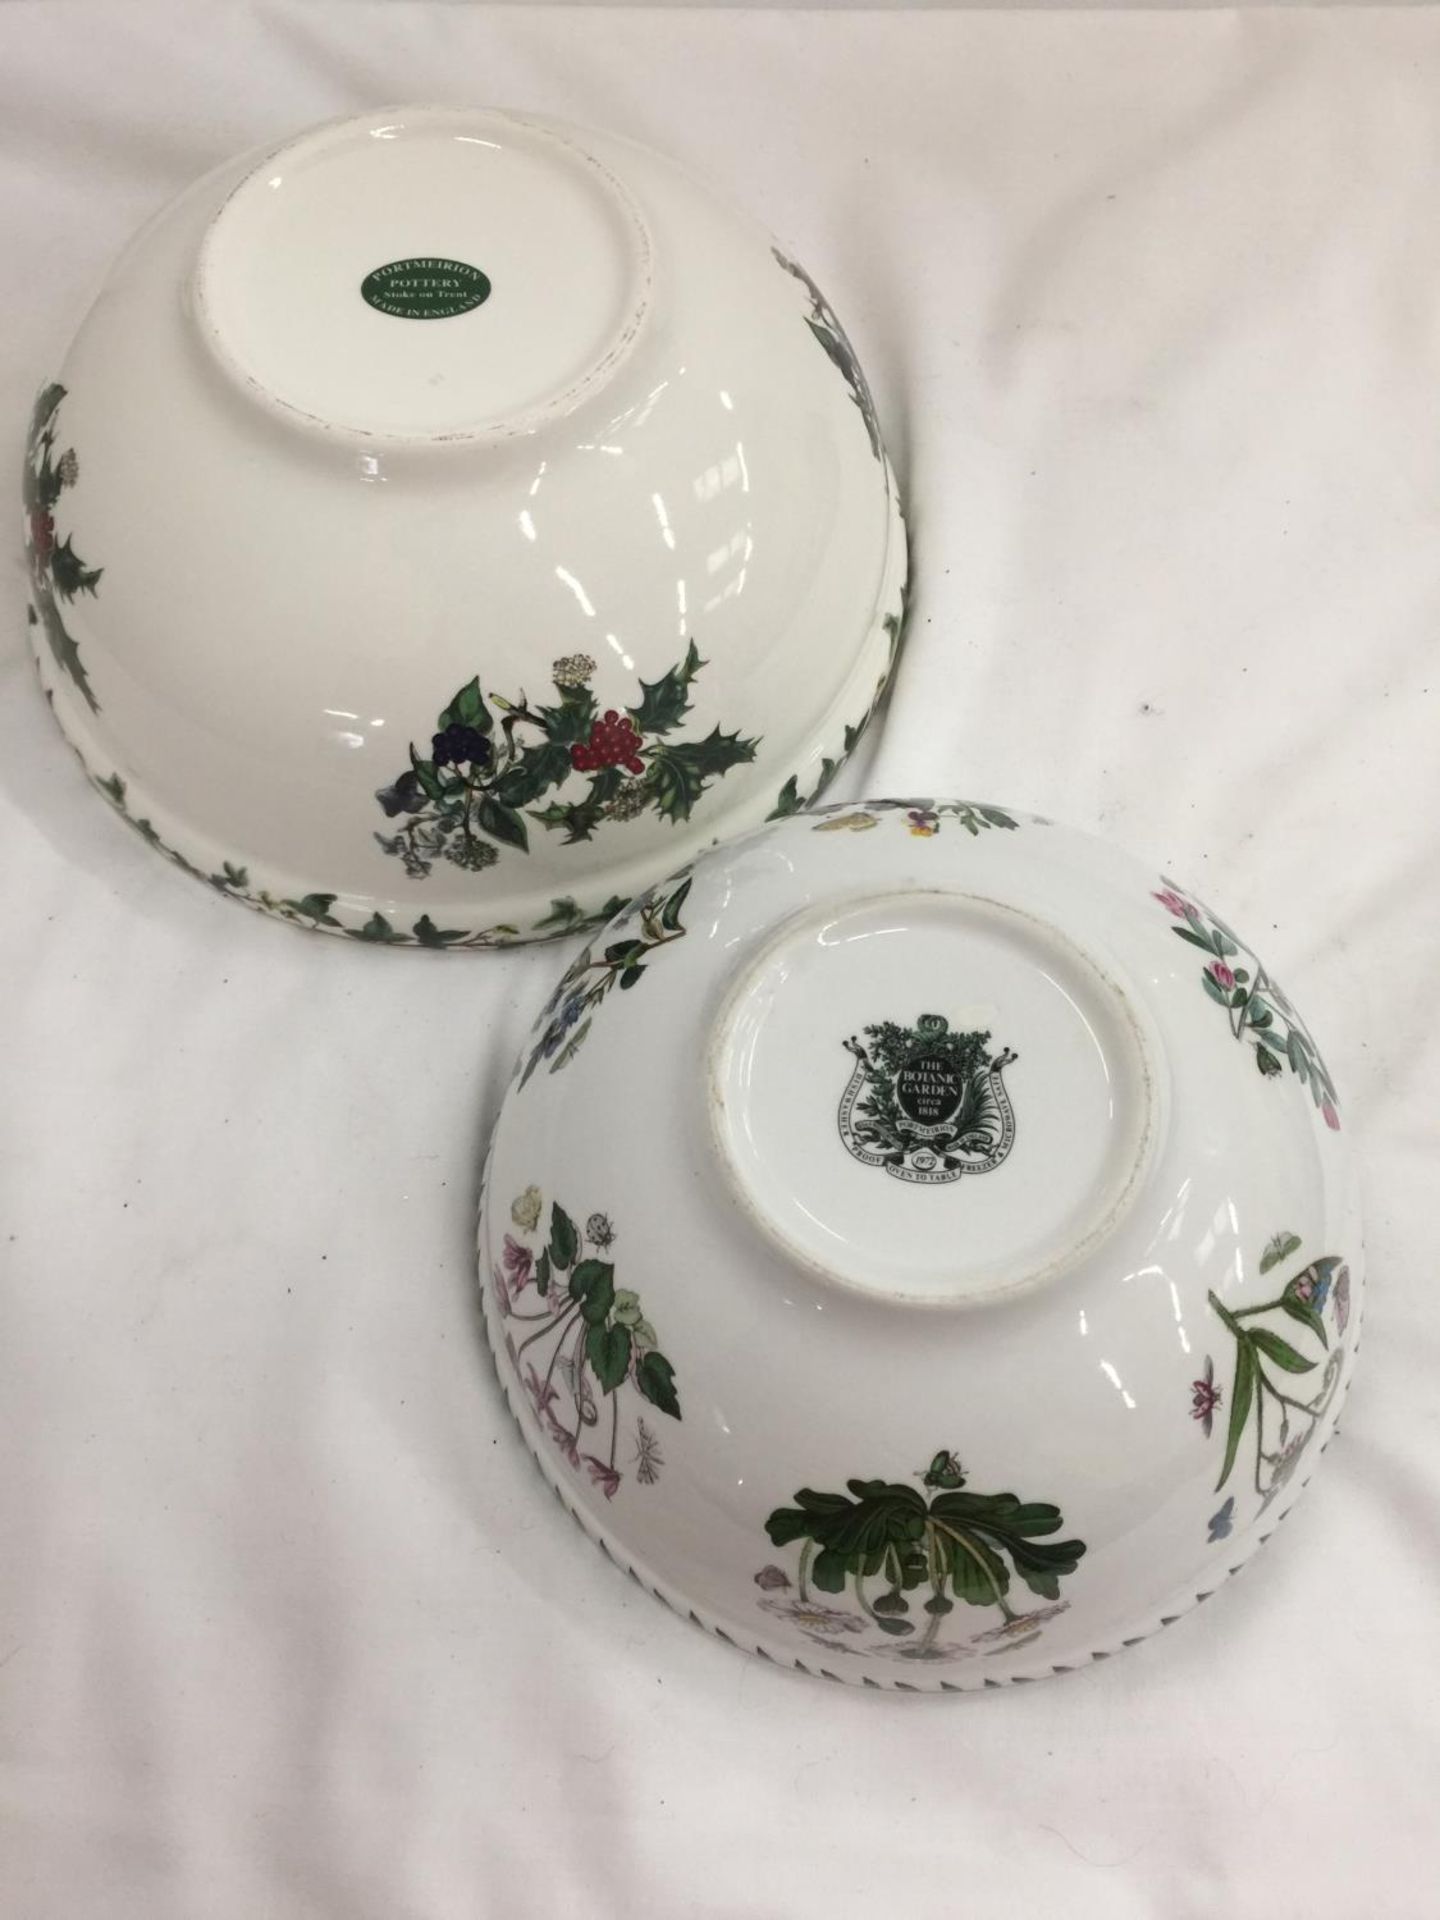 TWO PORTMERION BOWLS, ONE BEING CHRISTMAS 'THE HOLLY AND THE IVY' DIAMETER 23.5CM, THE OTHER - Image 3 of 3